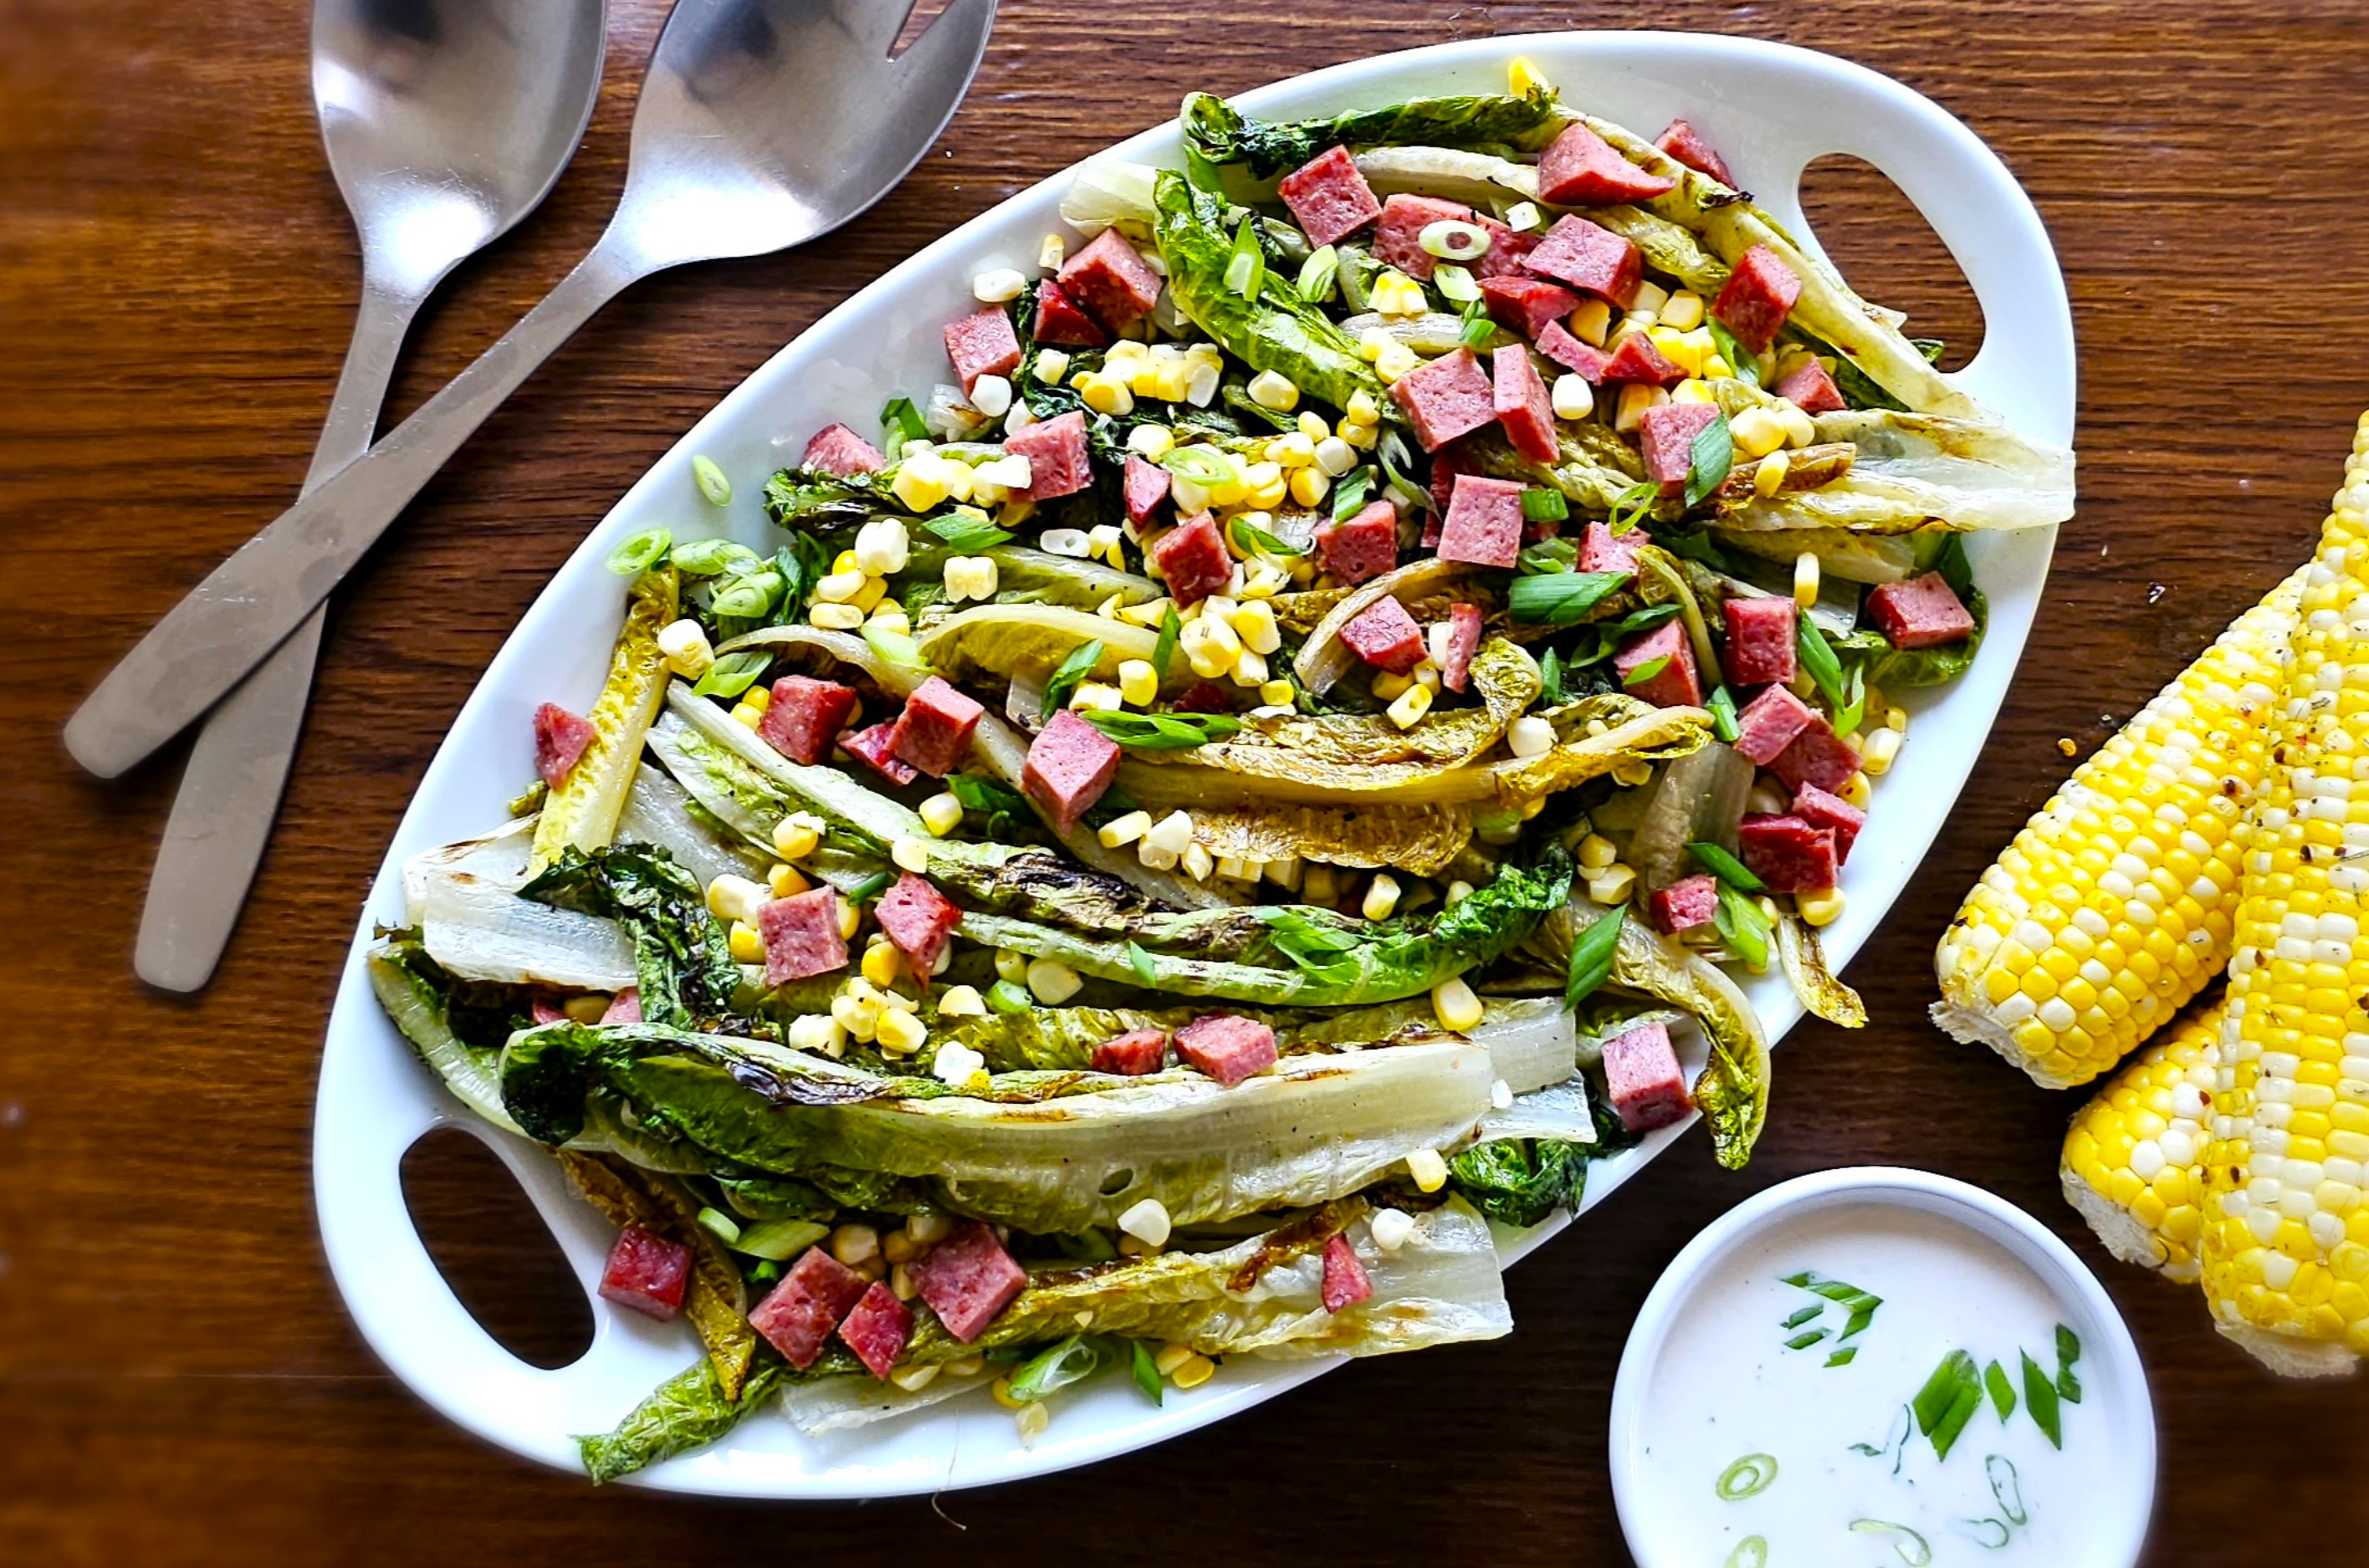 Grilled Romaine Salad with Salami Croutons